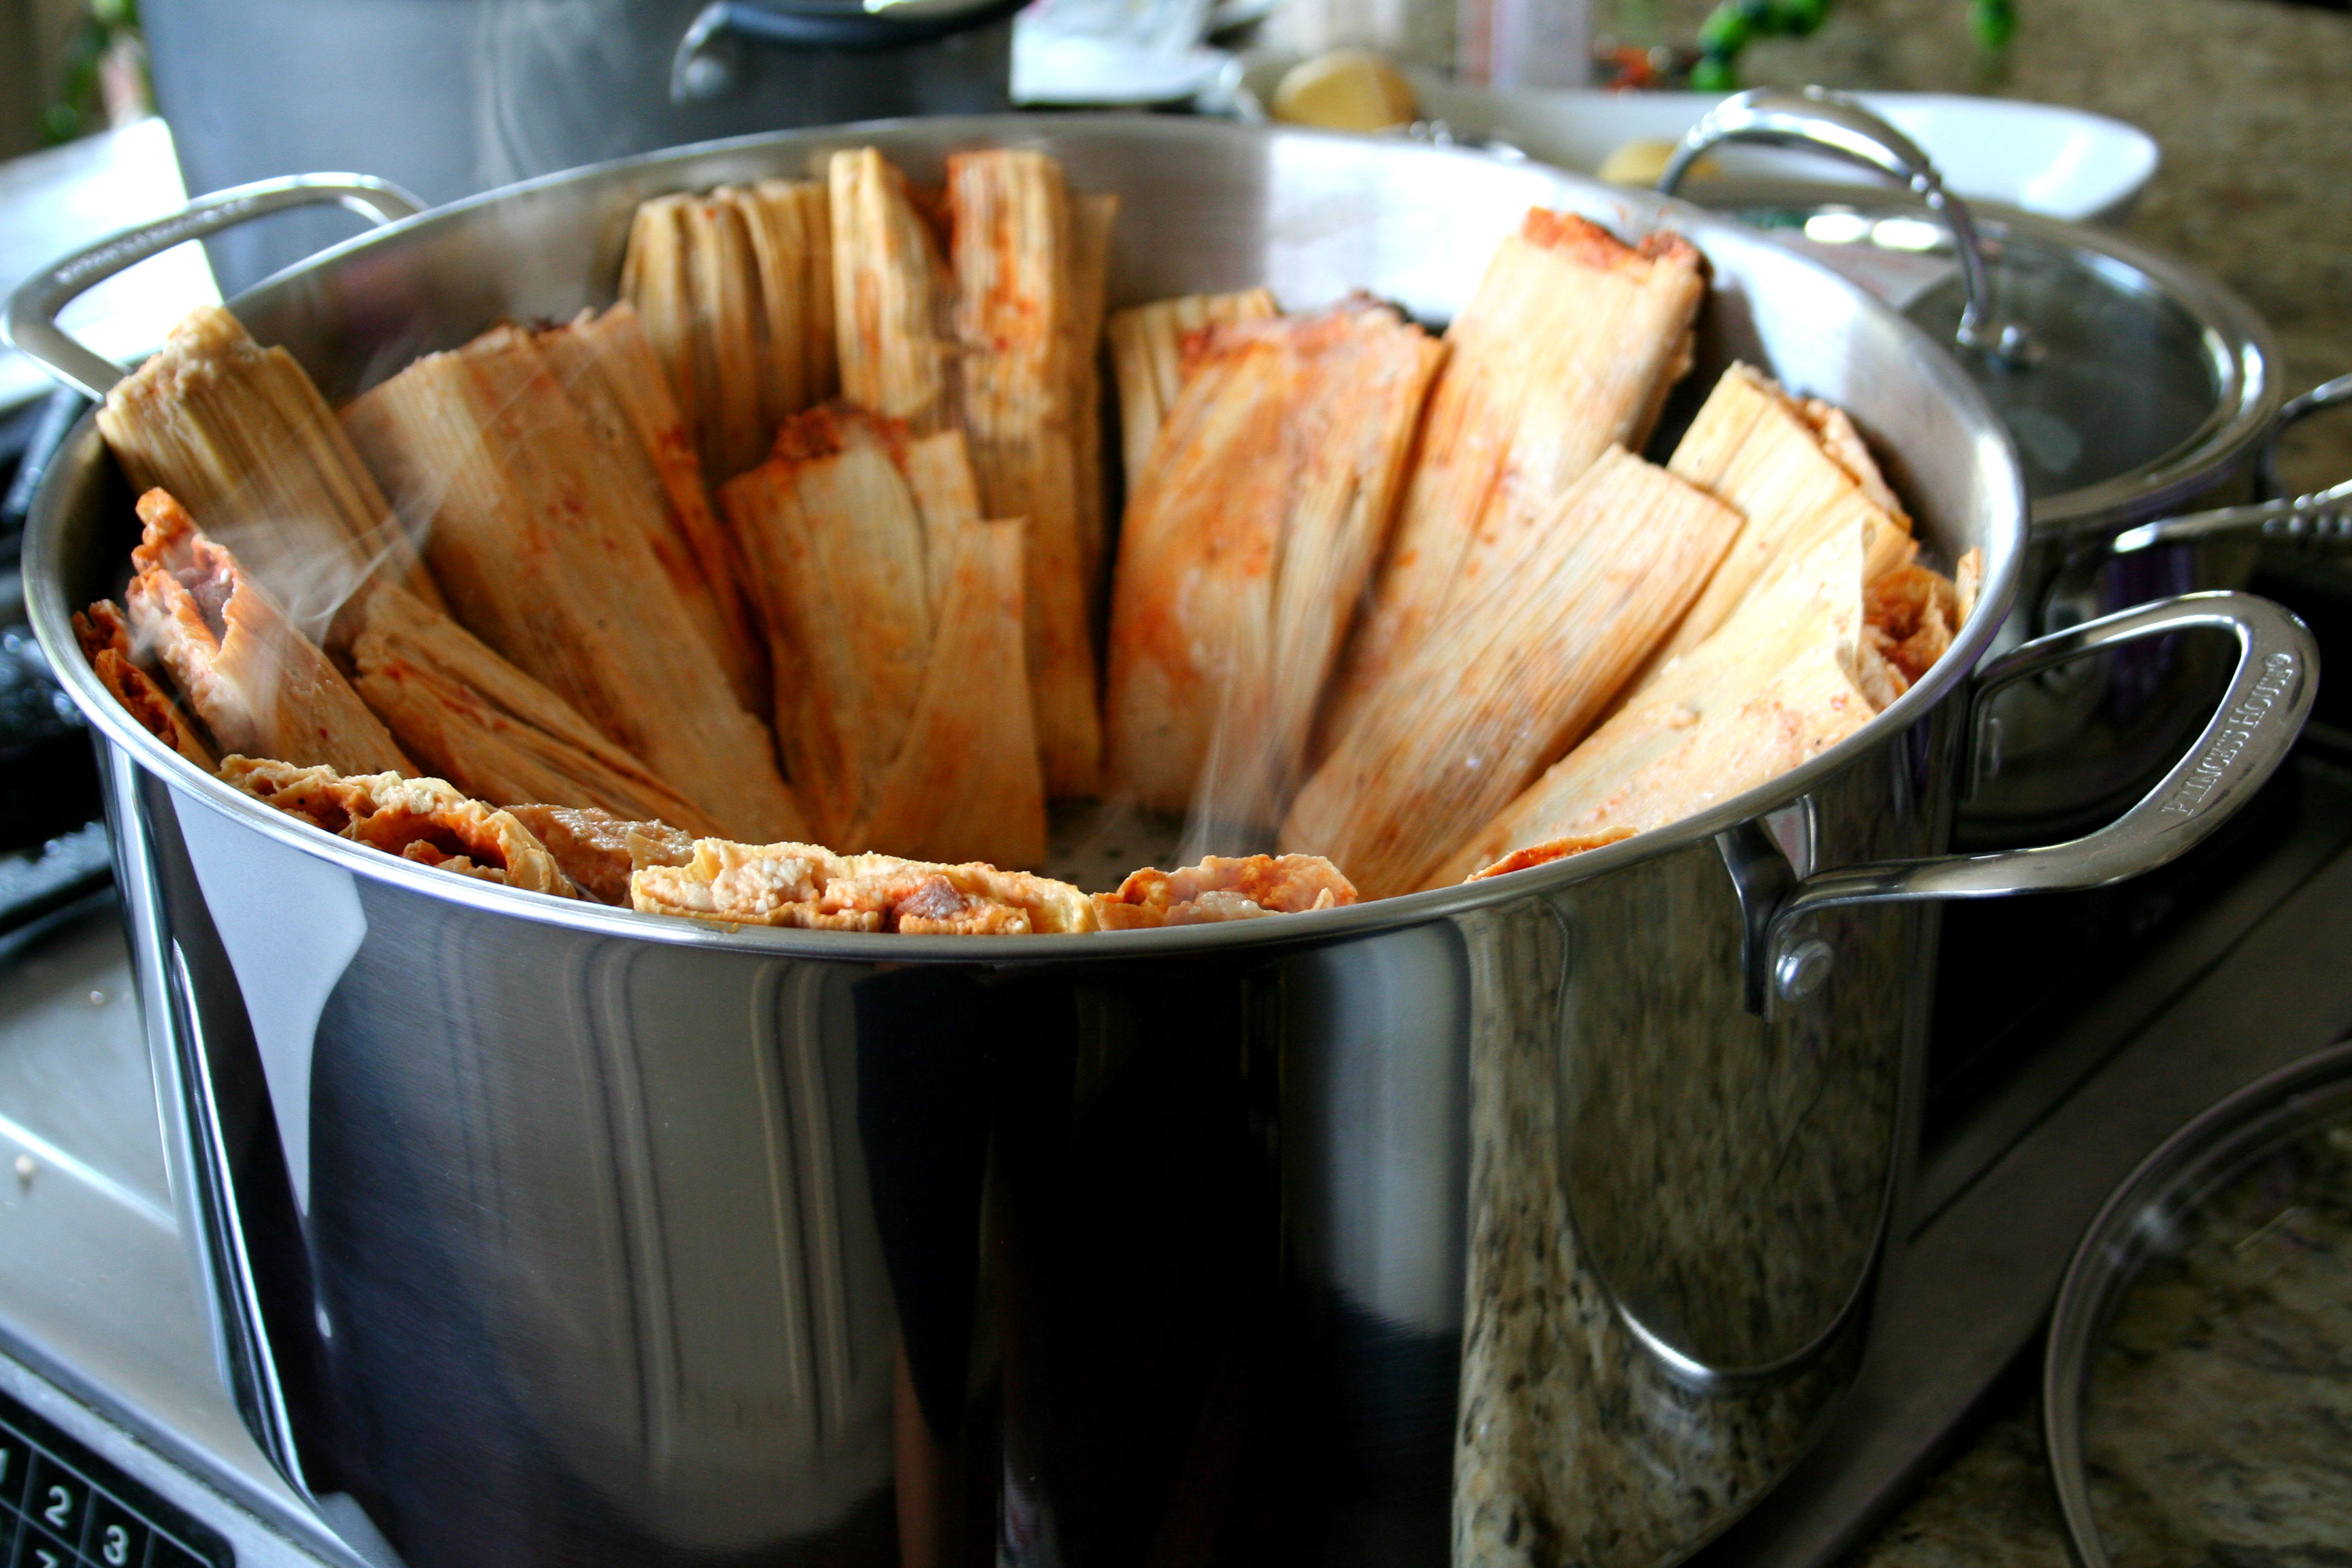 https://www.latinofoodie.com/pages/wp-content/uploads/2013/12/7644-Steaming-Hot-Tamales-for-Princess-House-2.jpg